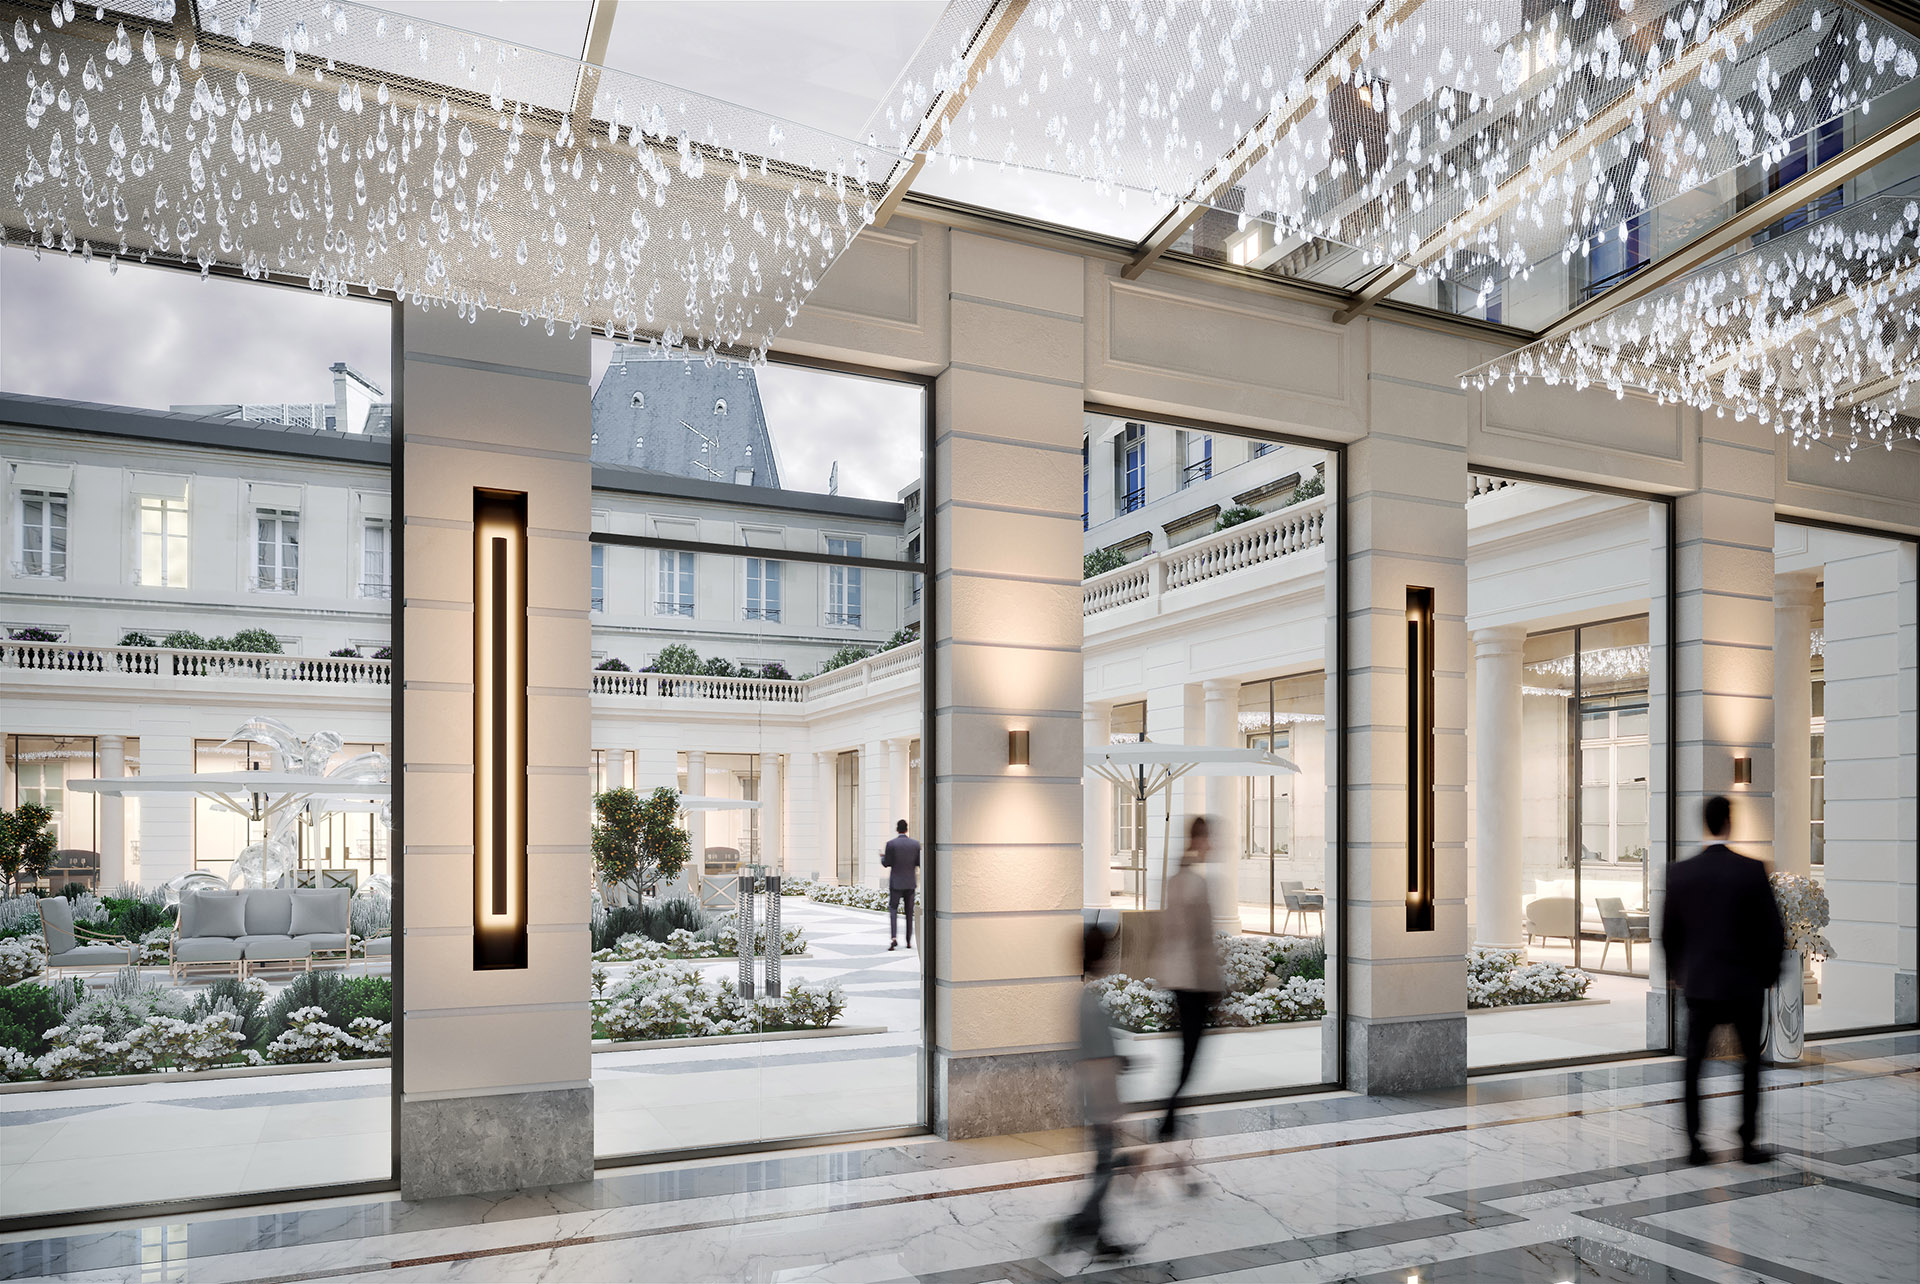 3D computer graphics of a luxurious gallery and its interior courtyard in Paris